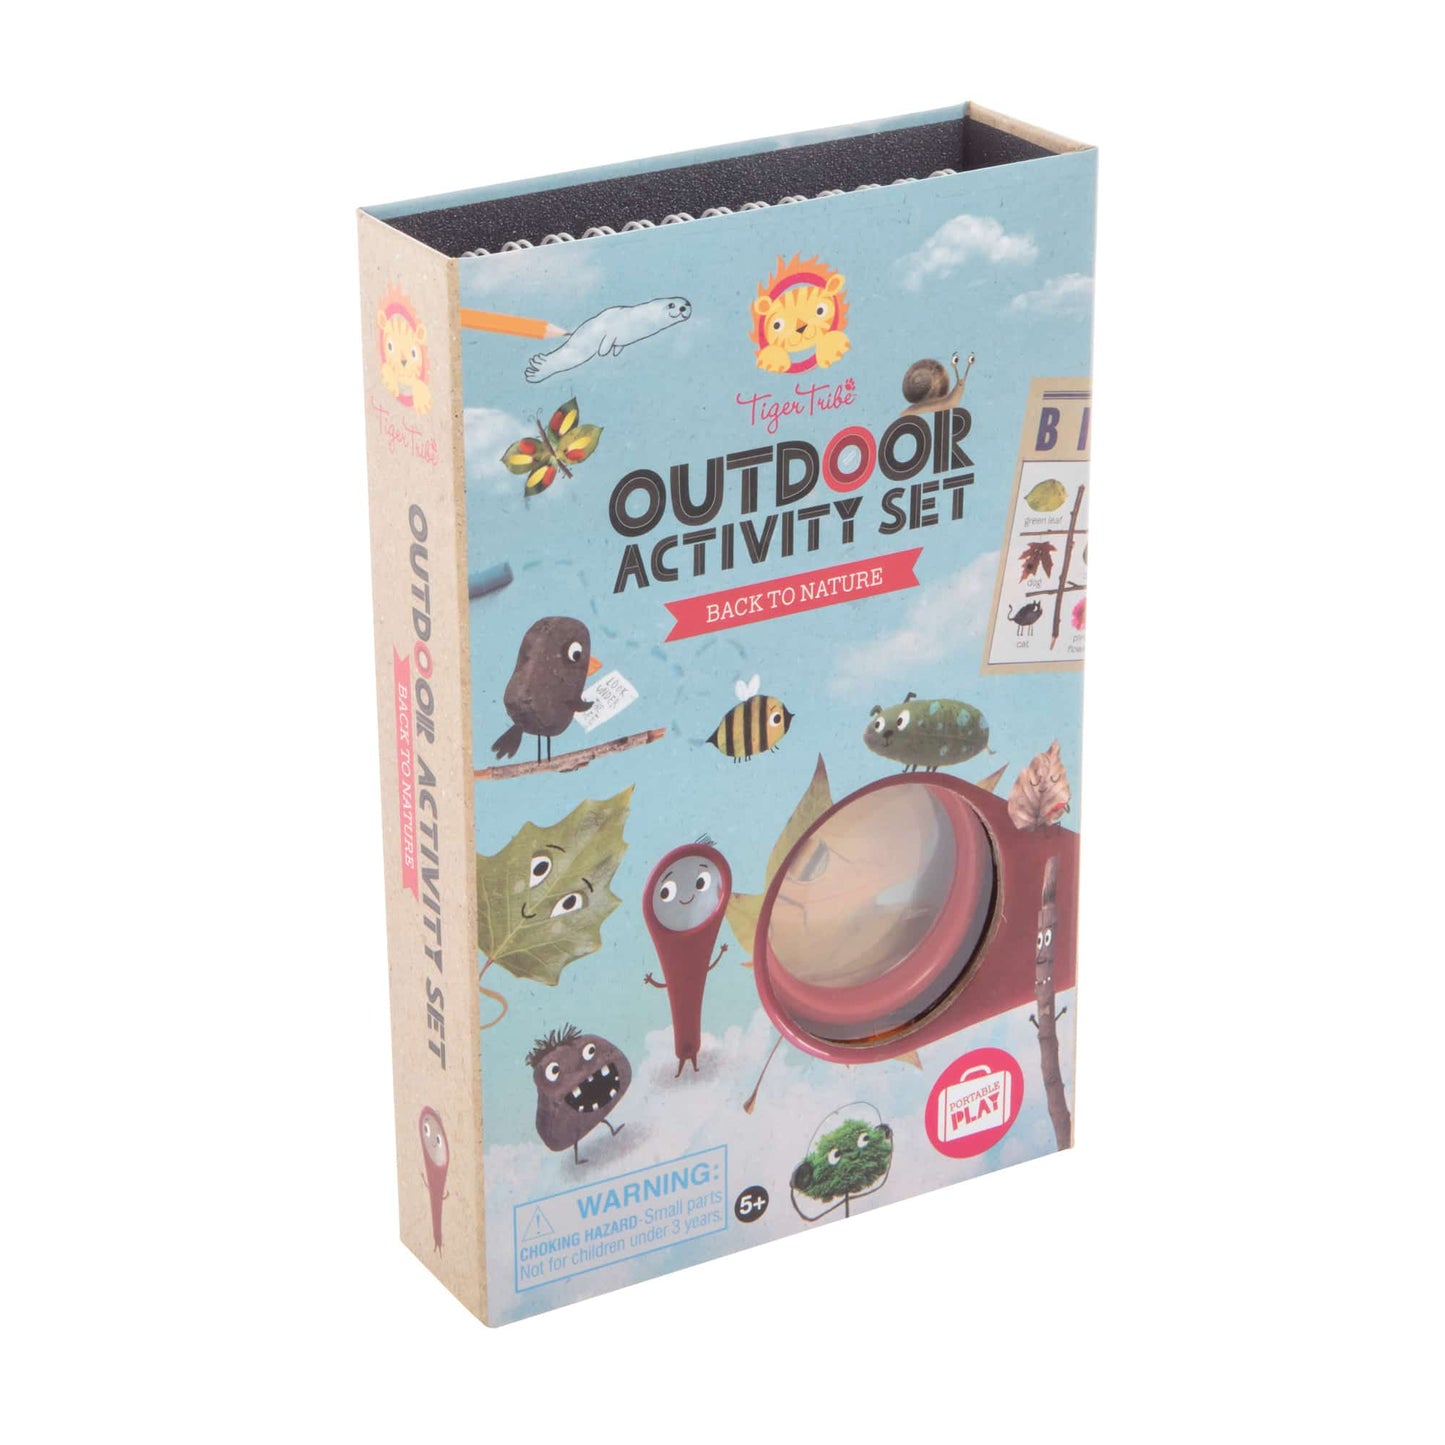 Back to Nature: Outdoor Activity Set